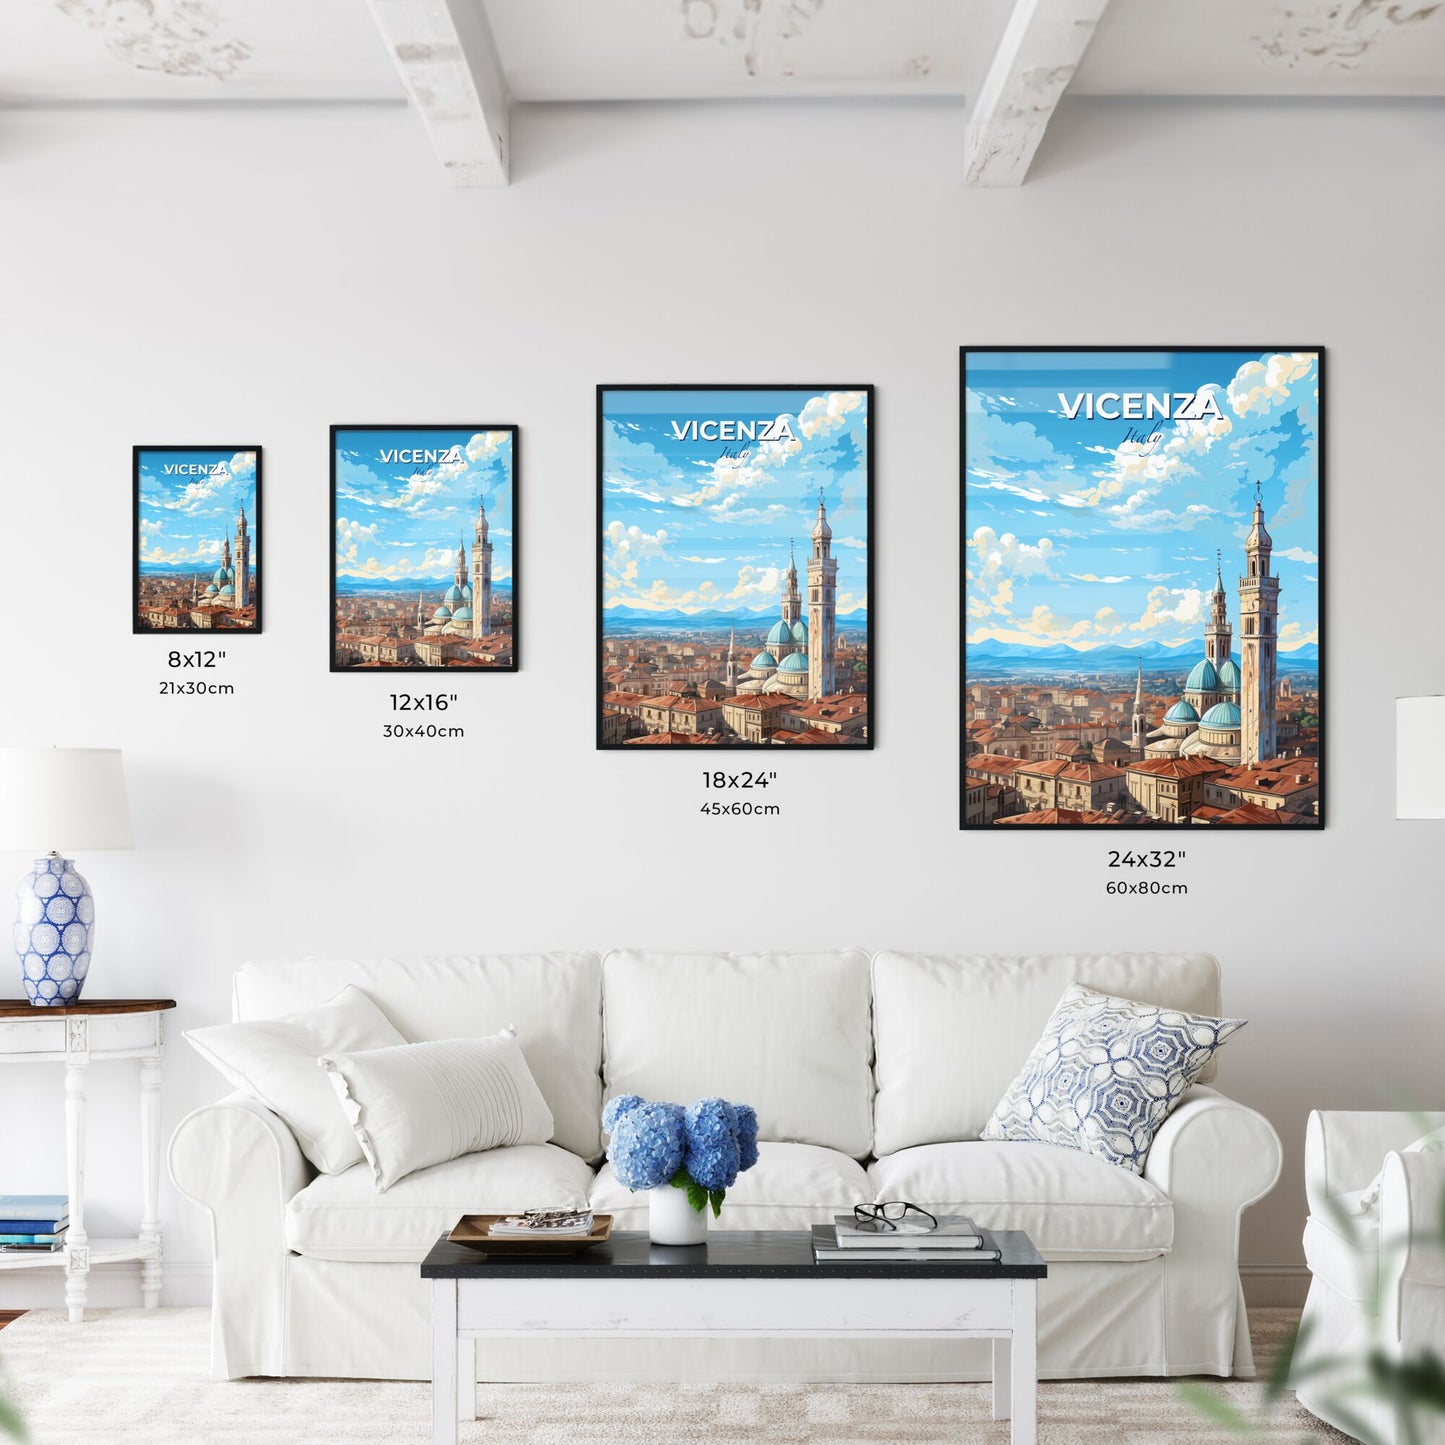 Vicenza Italy Skyline - A Large Building With Towers And A Steeple - Customizable Travel Gift Default Title